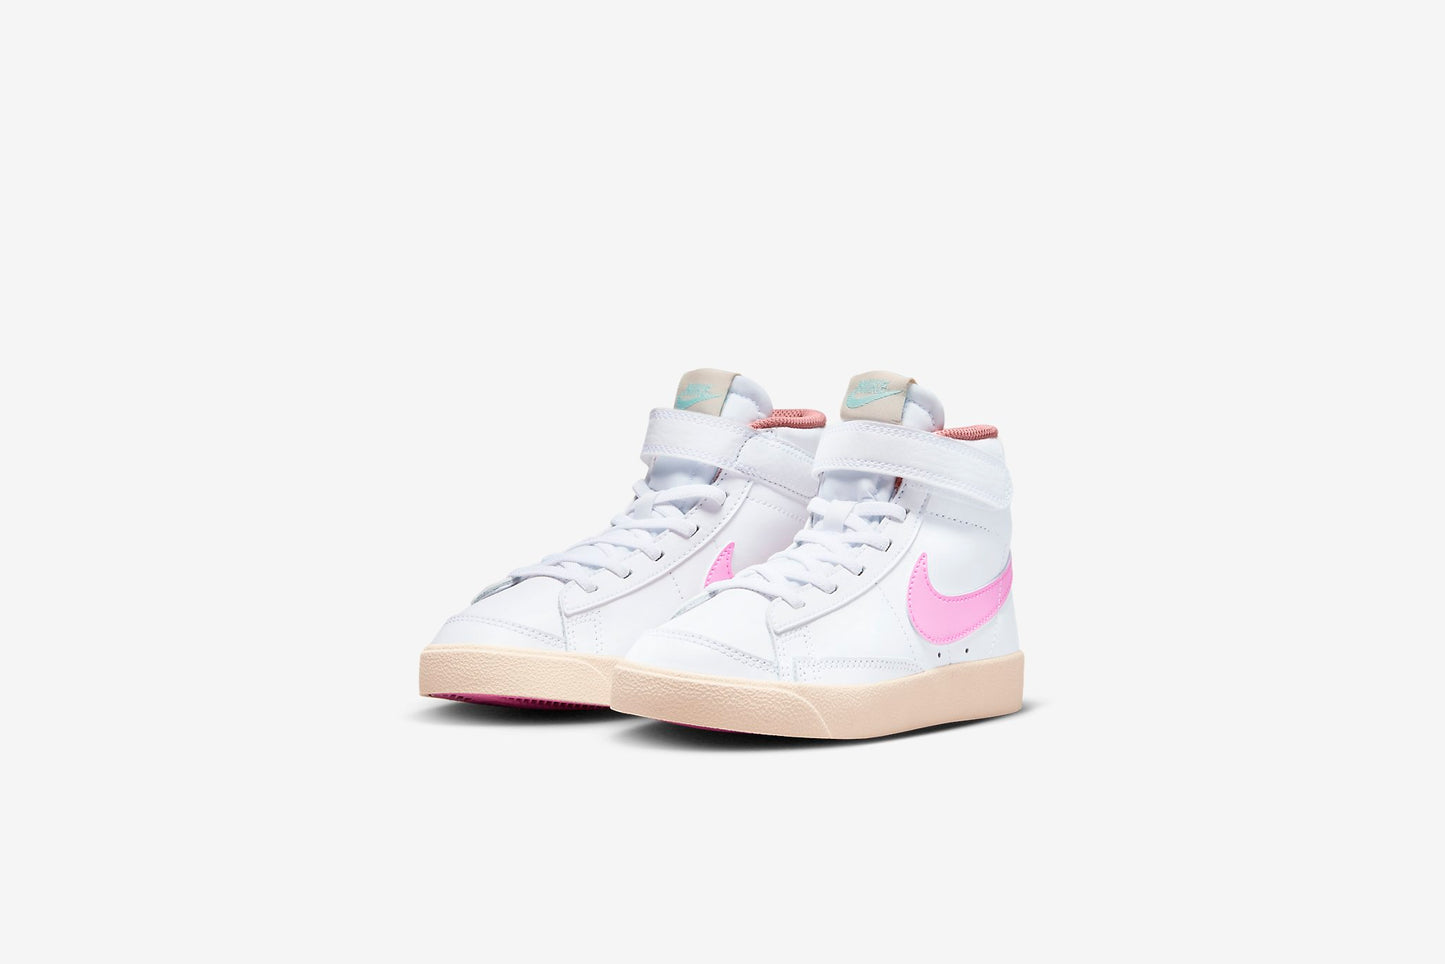 Nike "Blazer Mid '77 SE" PS - White / Pink Spell - Guava Ice